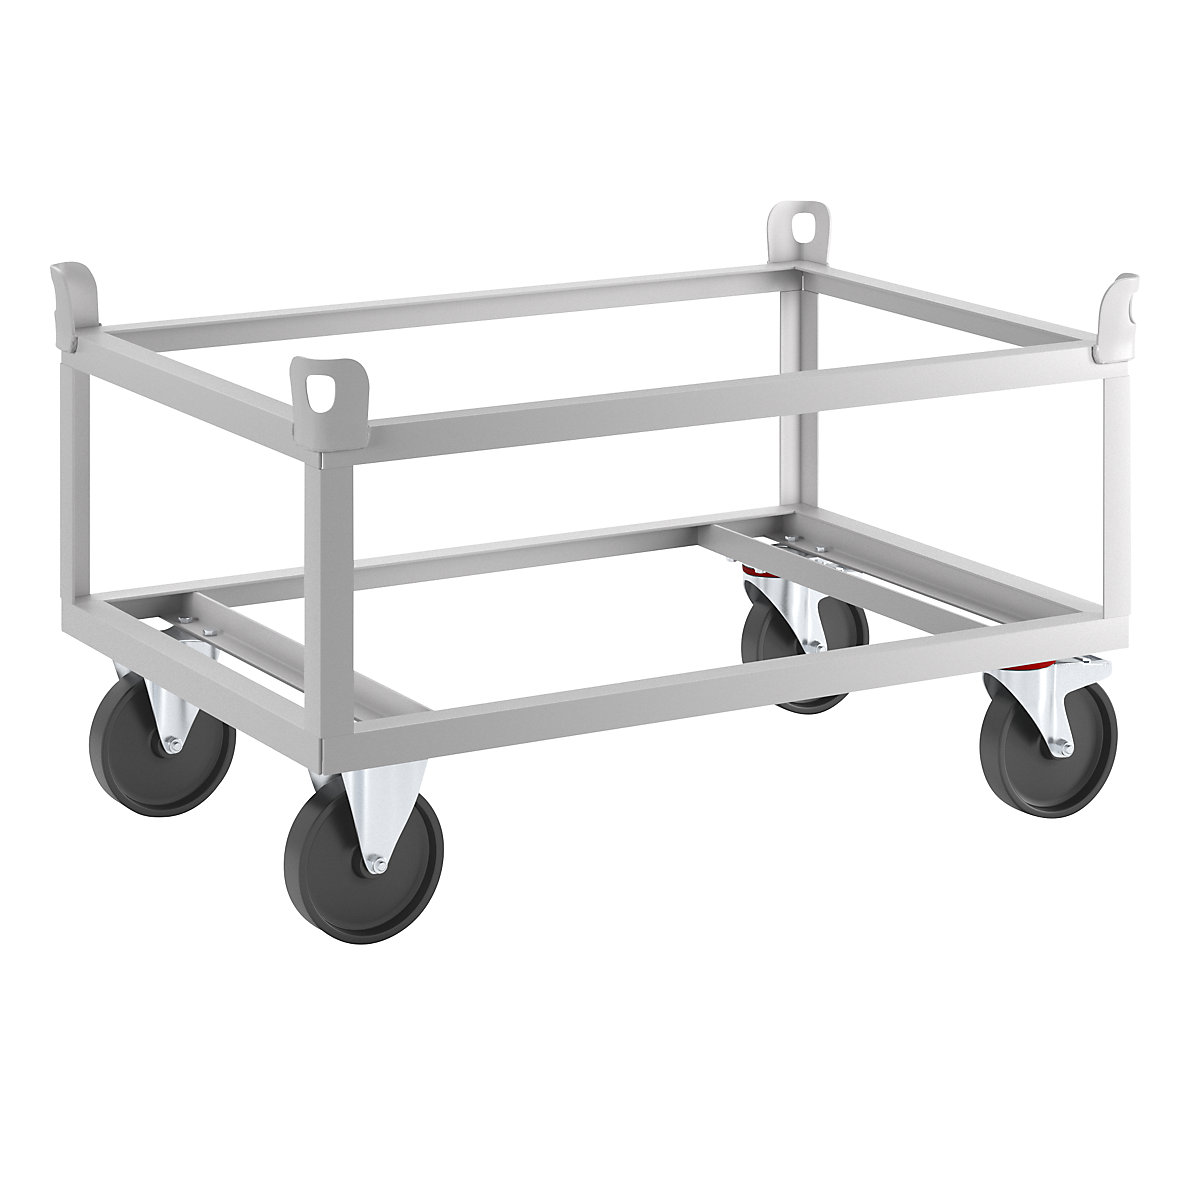 ESD dolly – eurokraft pro, ESD, max. load 1000 kg, loading height 650 mm-8